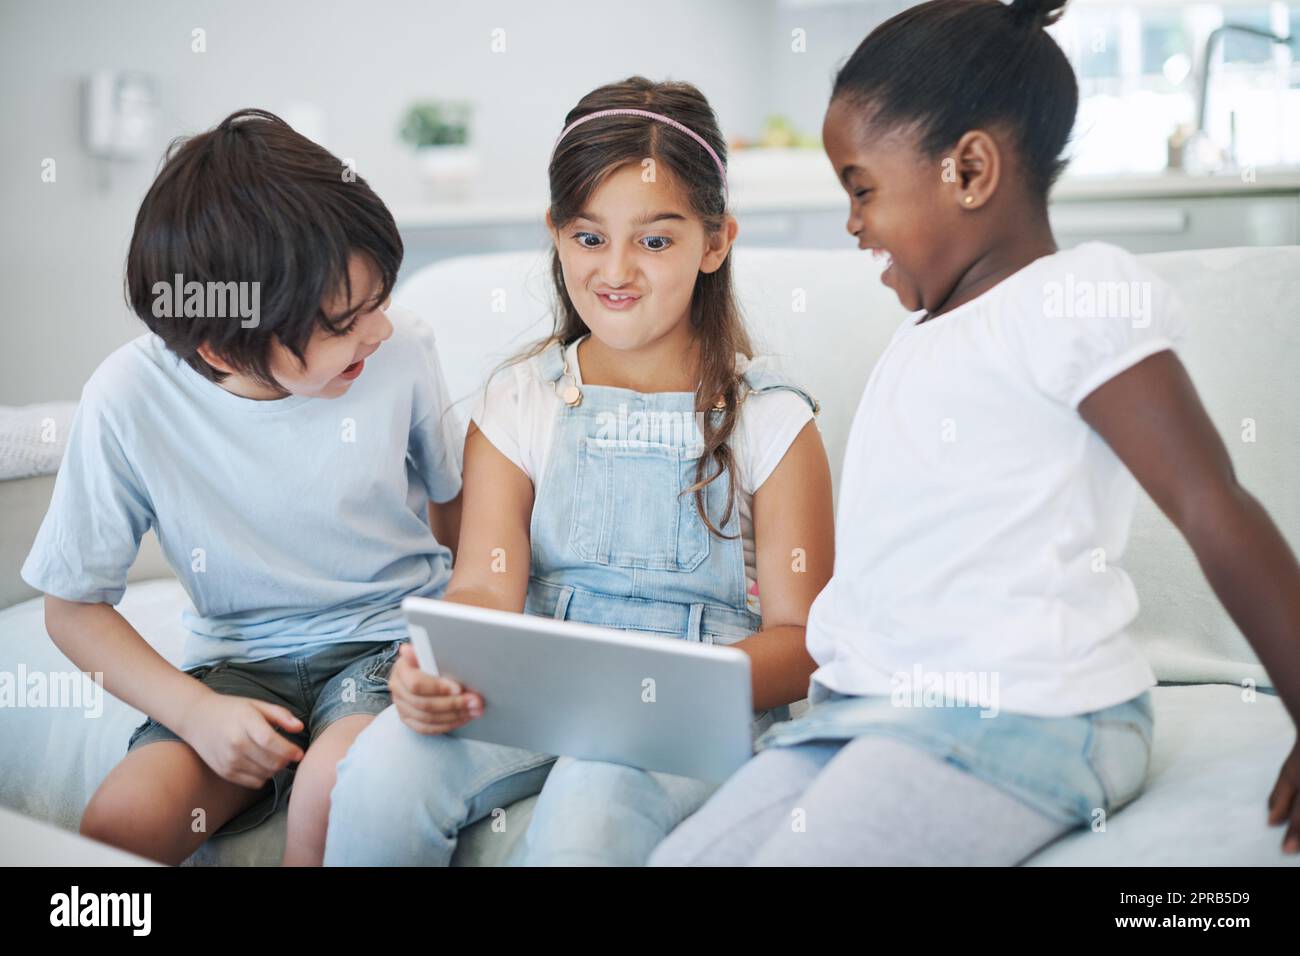 Im the class clown. a group of little children using a digital tablet at home. Stock Photo